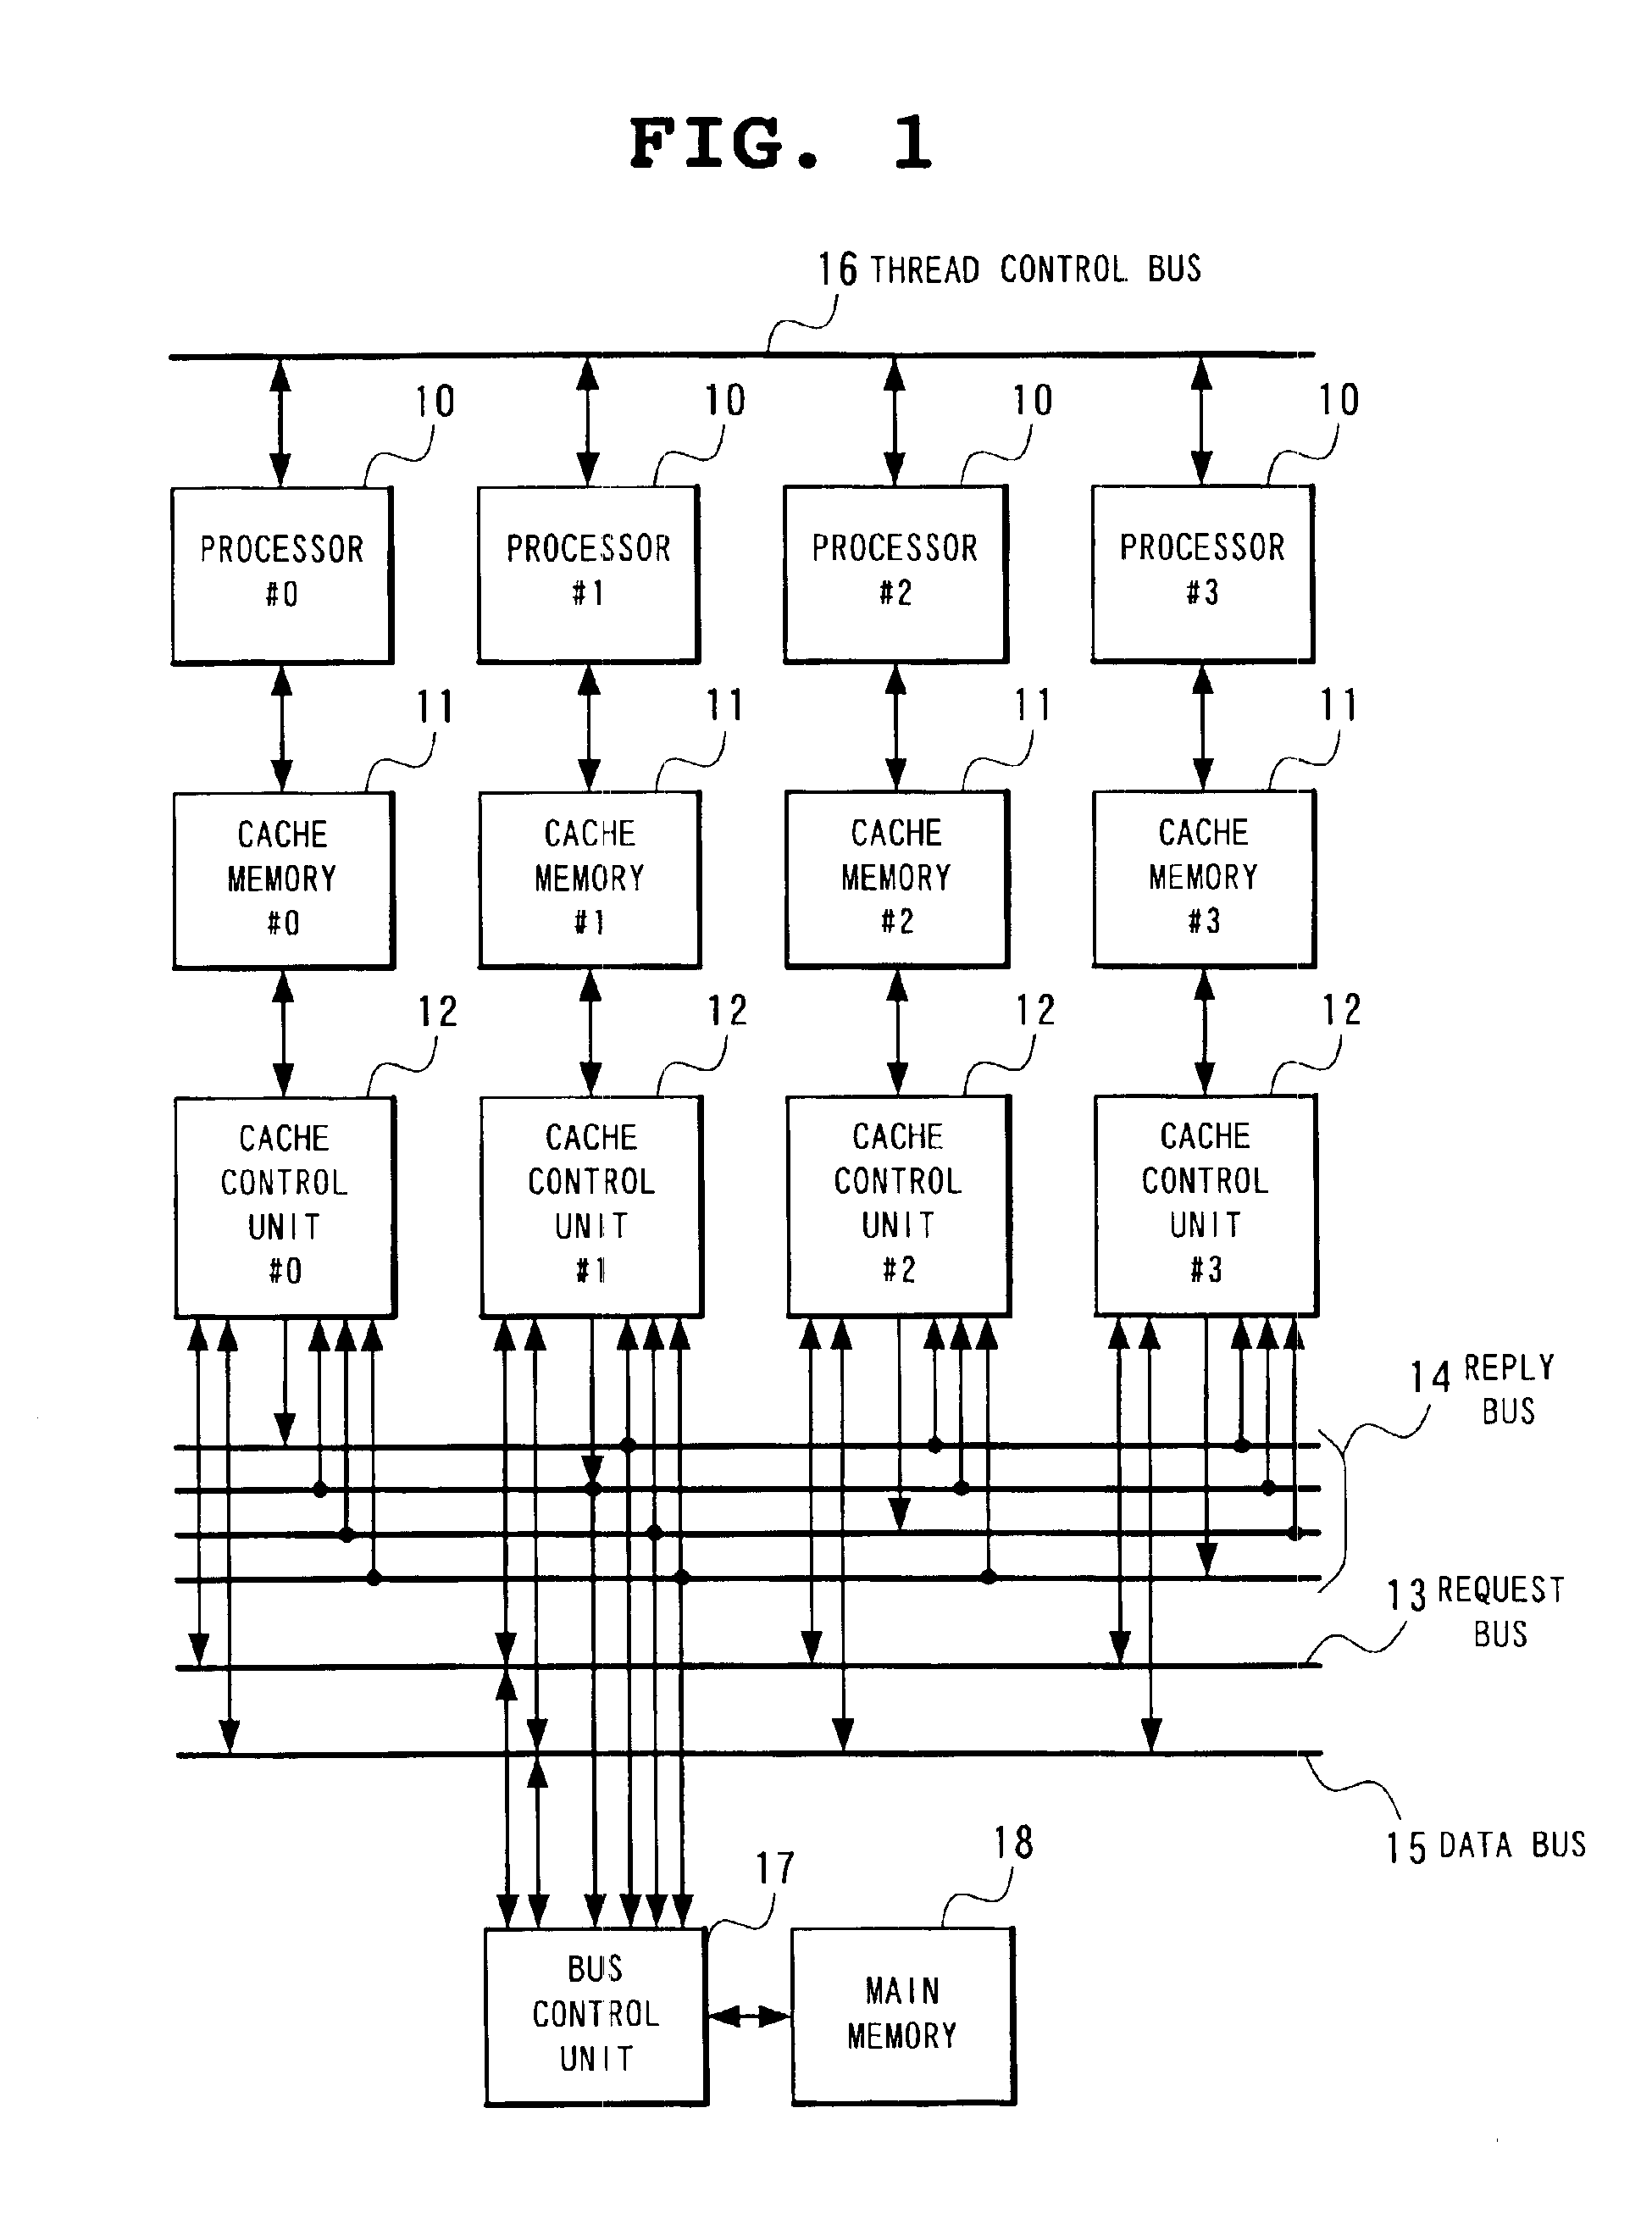 Speculative cache memory control method and multi-processor system